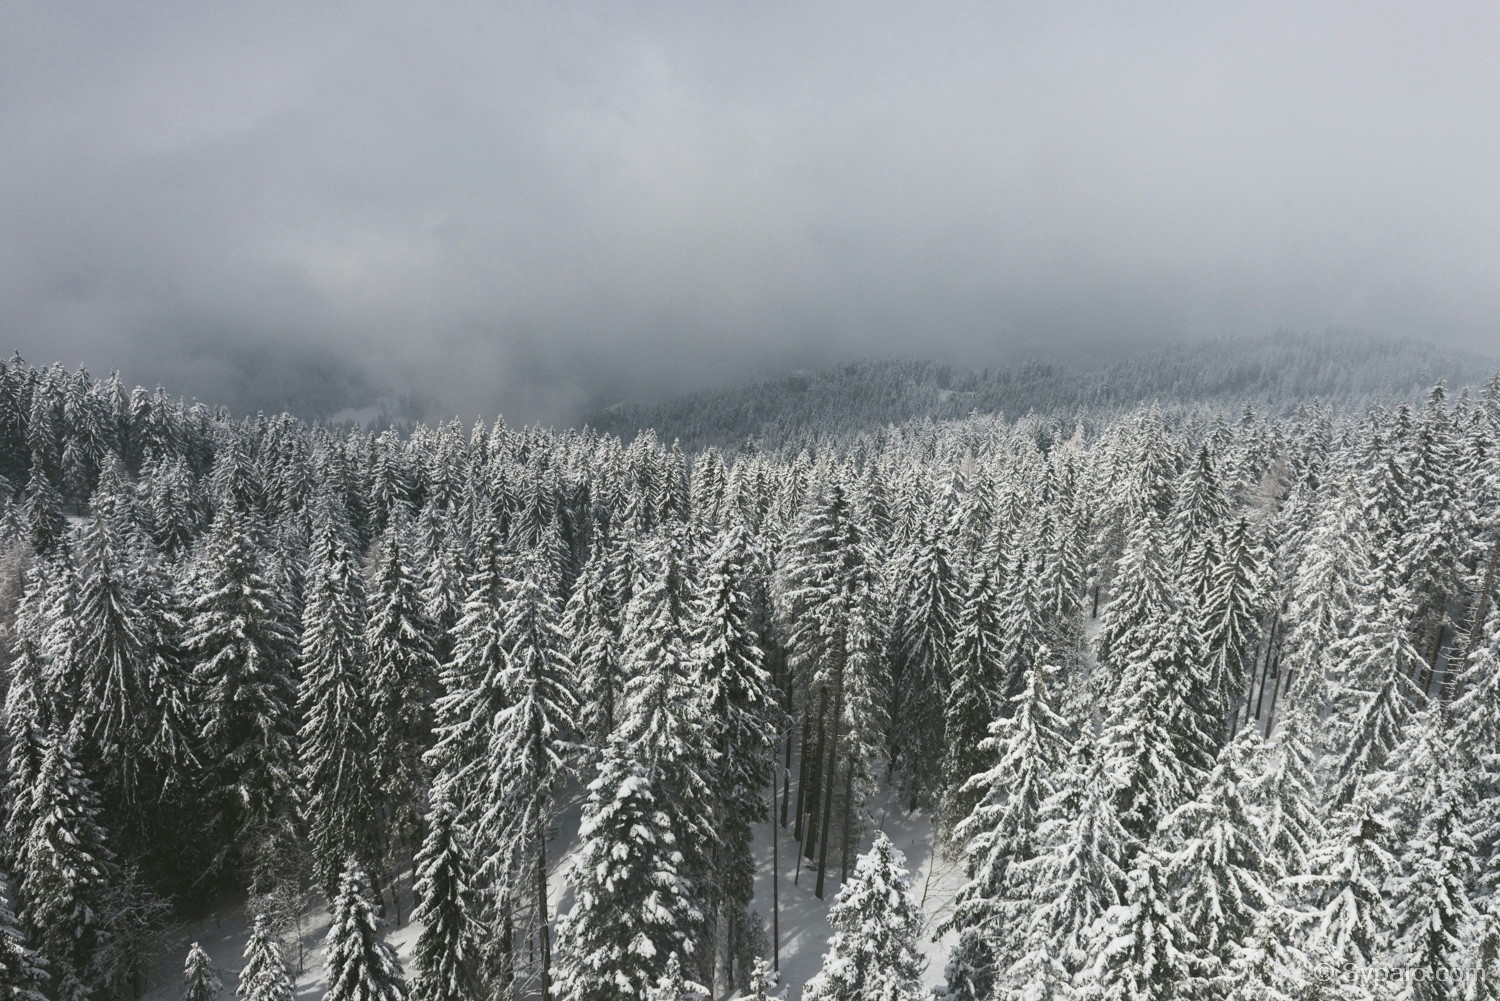 Snowy Christmas trees in Pilatus, Switzerland; view from the lift